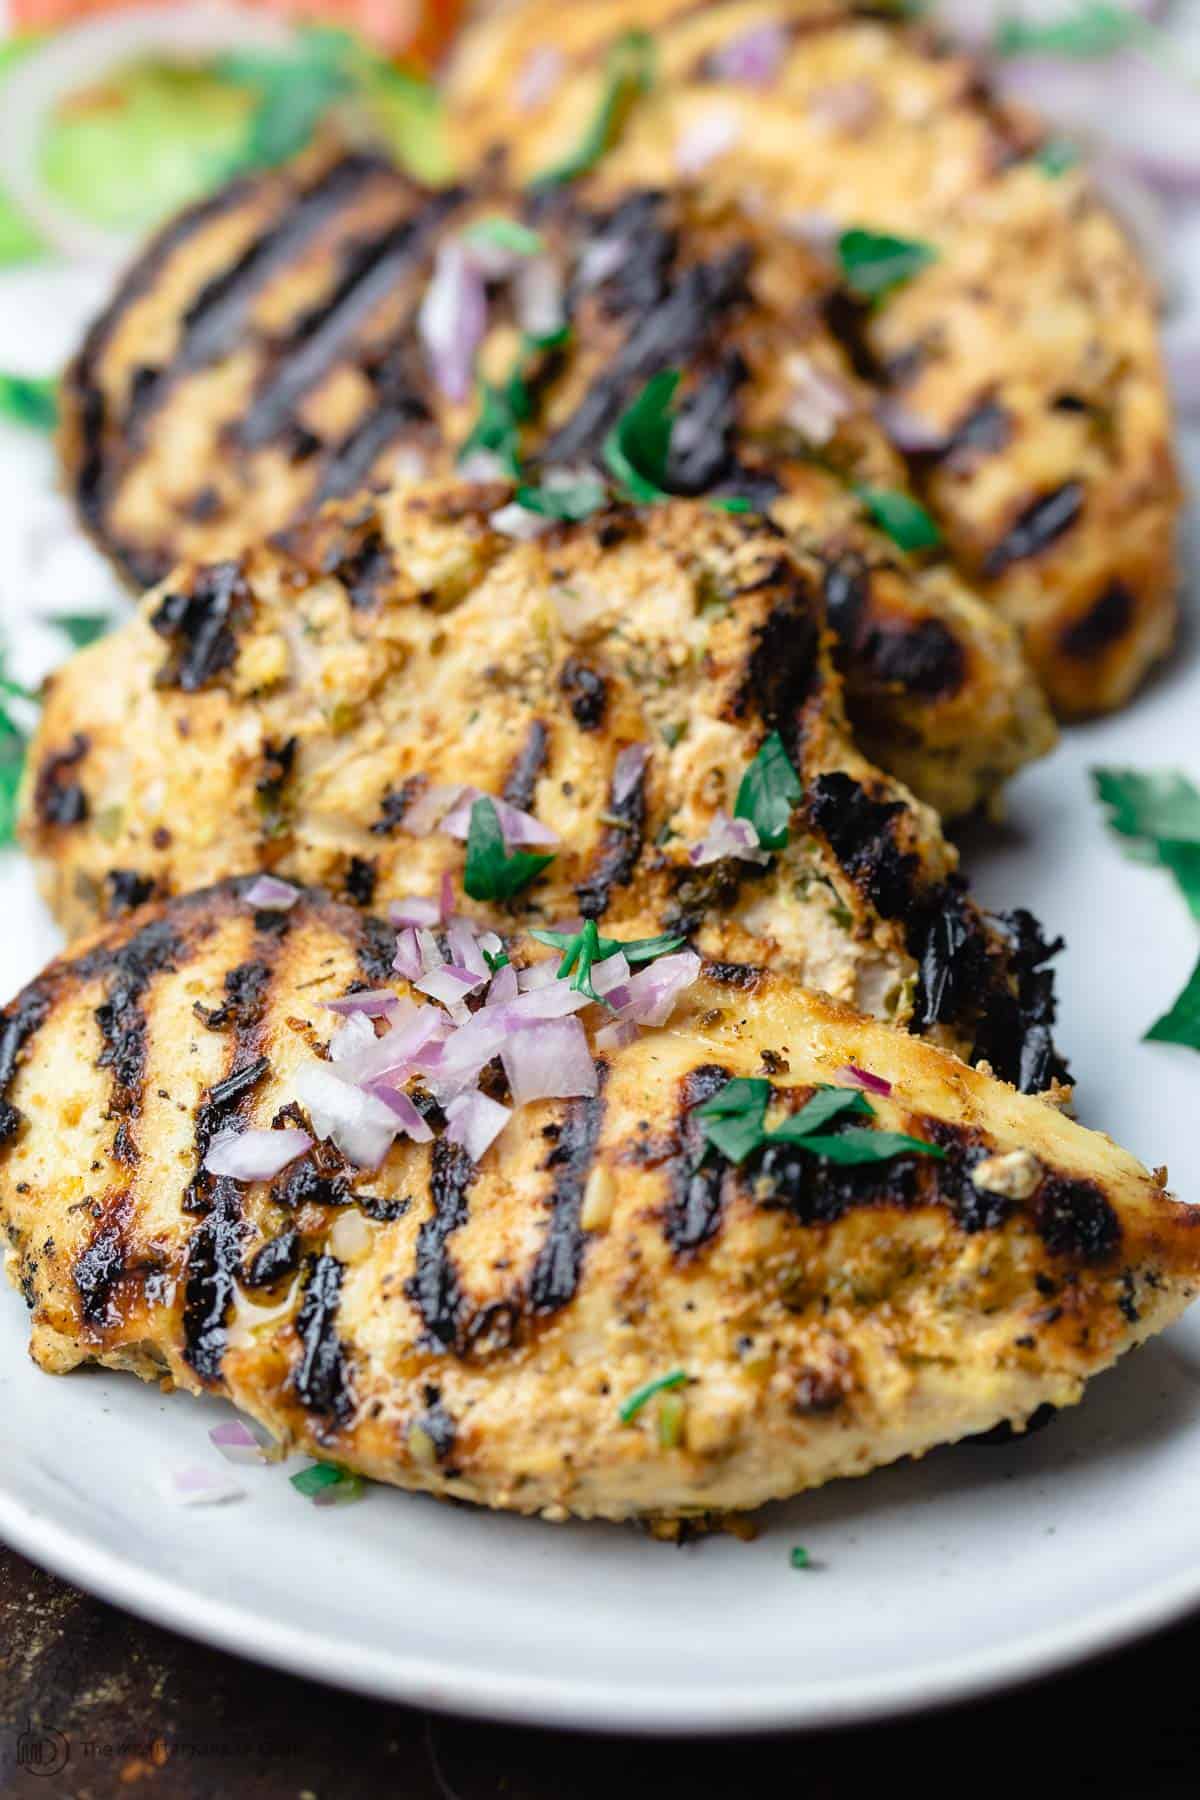 Grilled chicken breast on plate